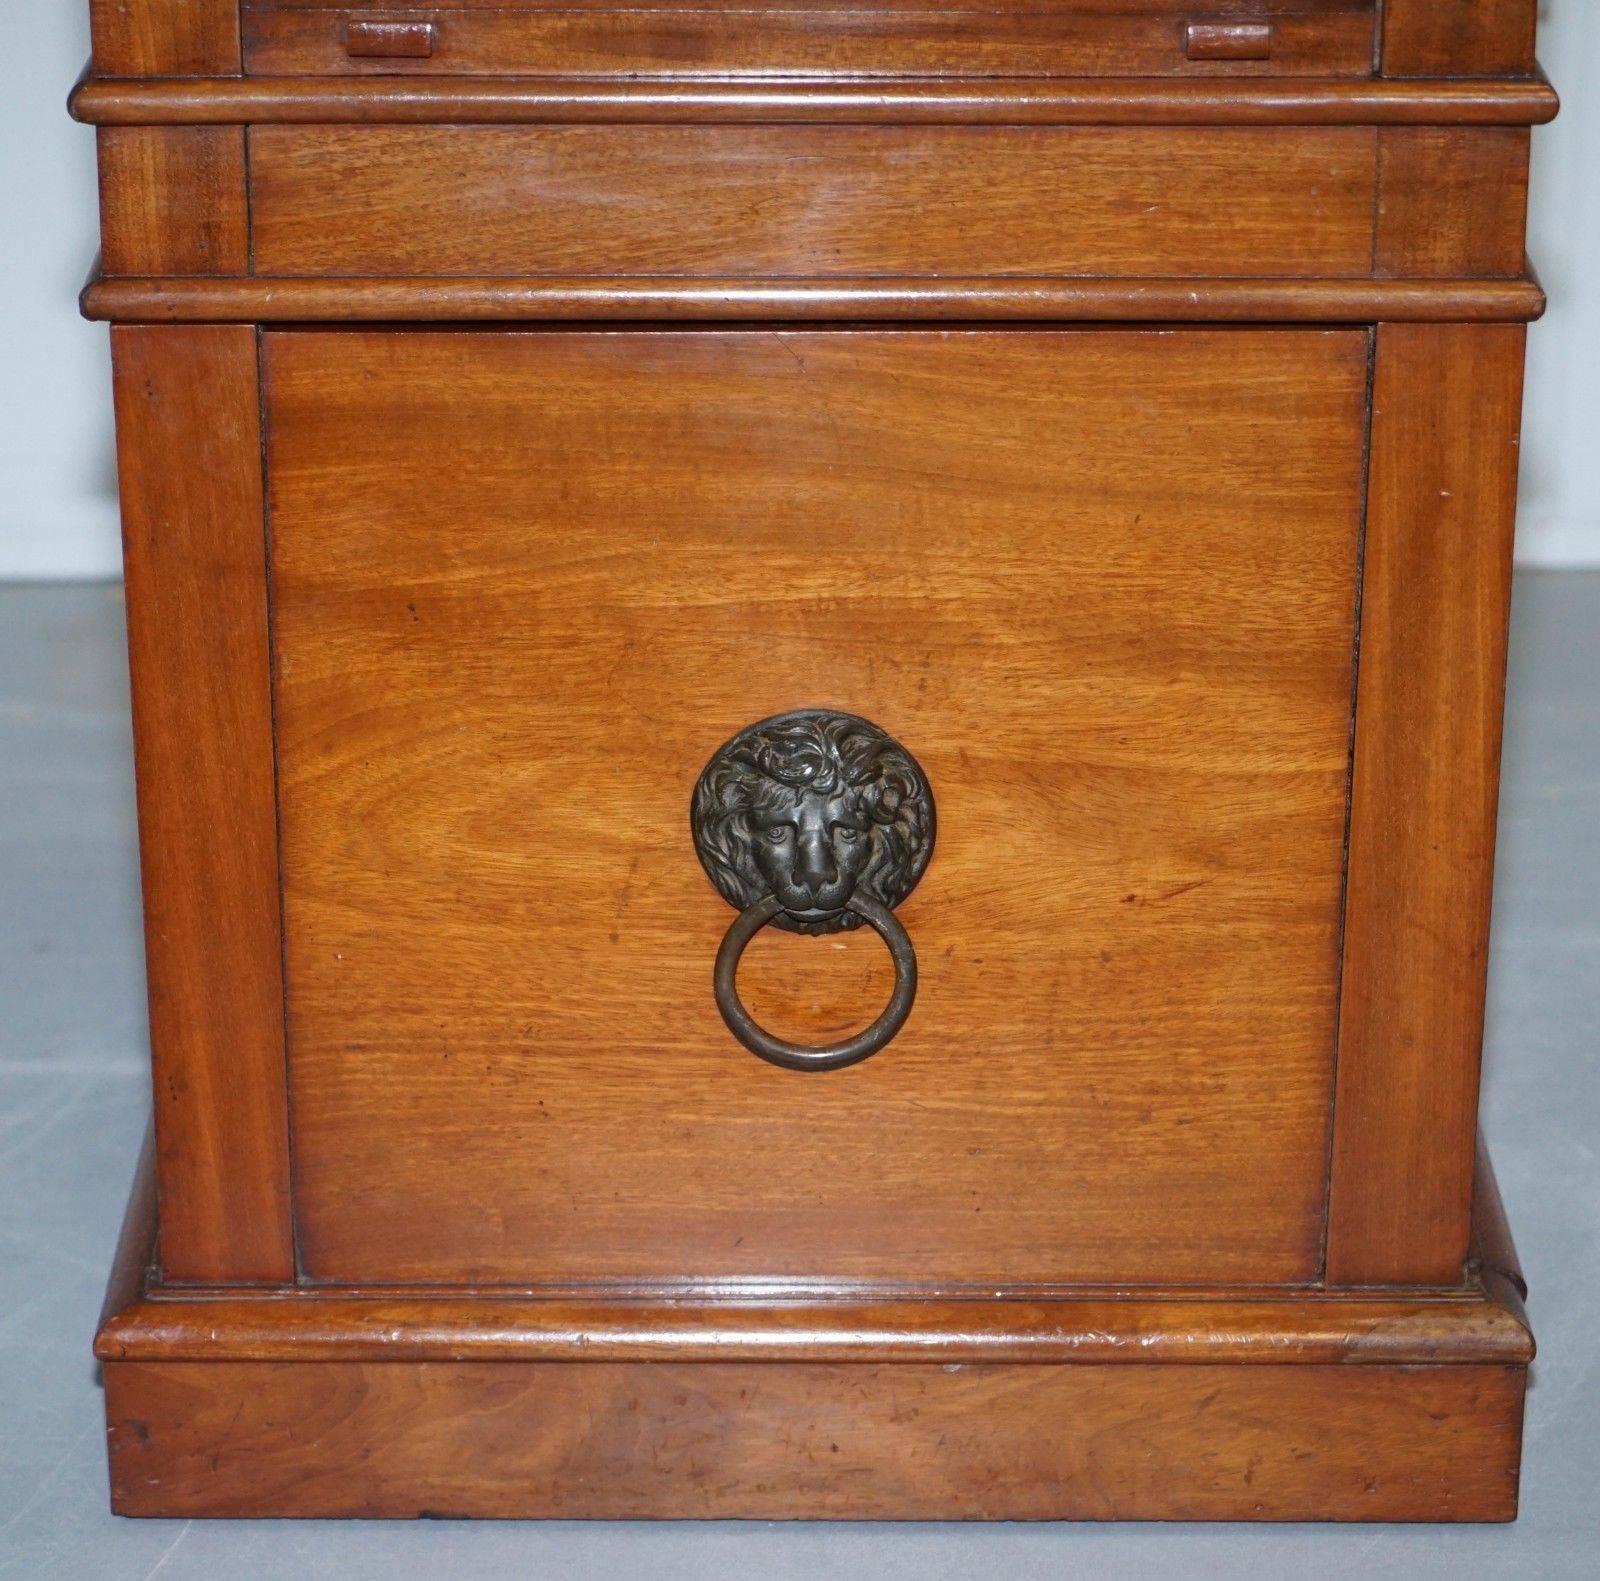 Hand-Crafted Rare C Hindley and Sons, 1766-1895 Satin Walnut Drinks Pedestal Cabinet Tambour